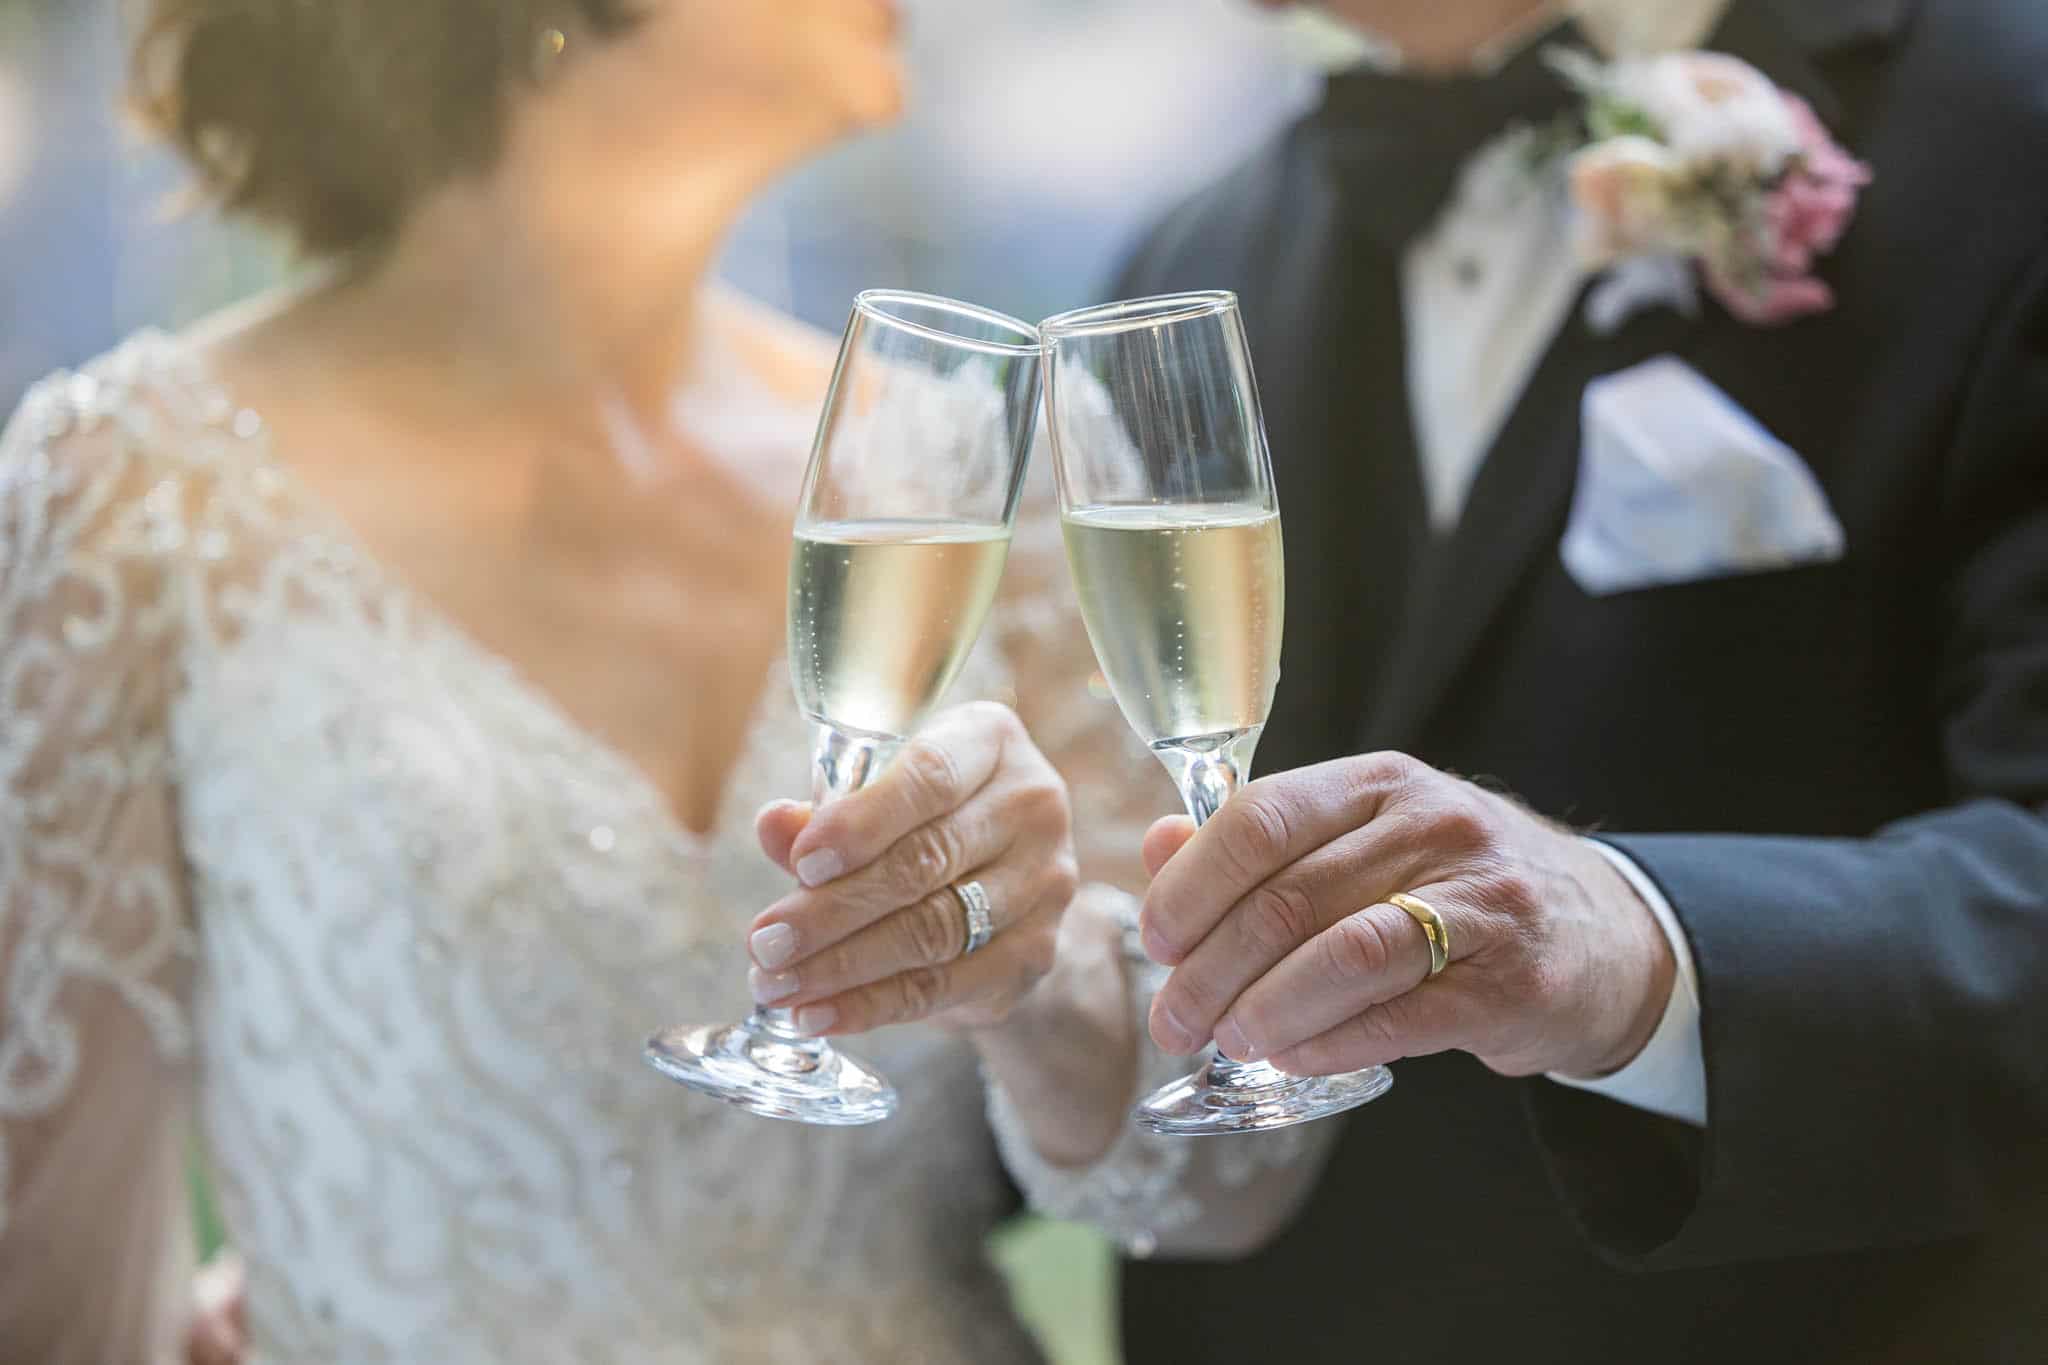 bride and groom toasting their champagne glasses together while looking at each other and smiling